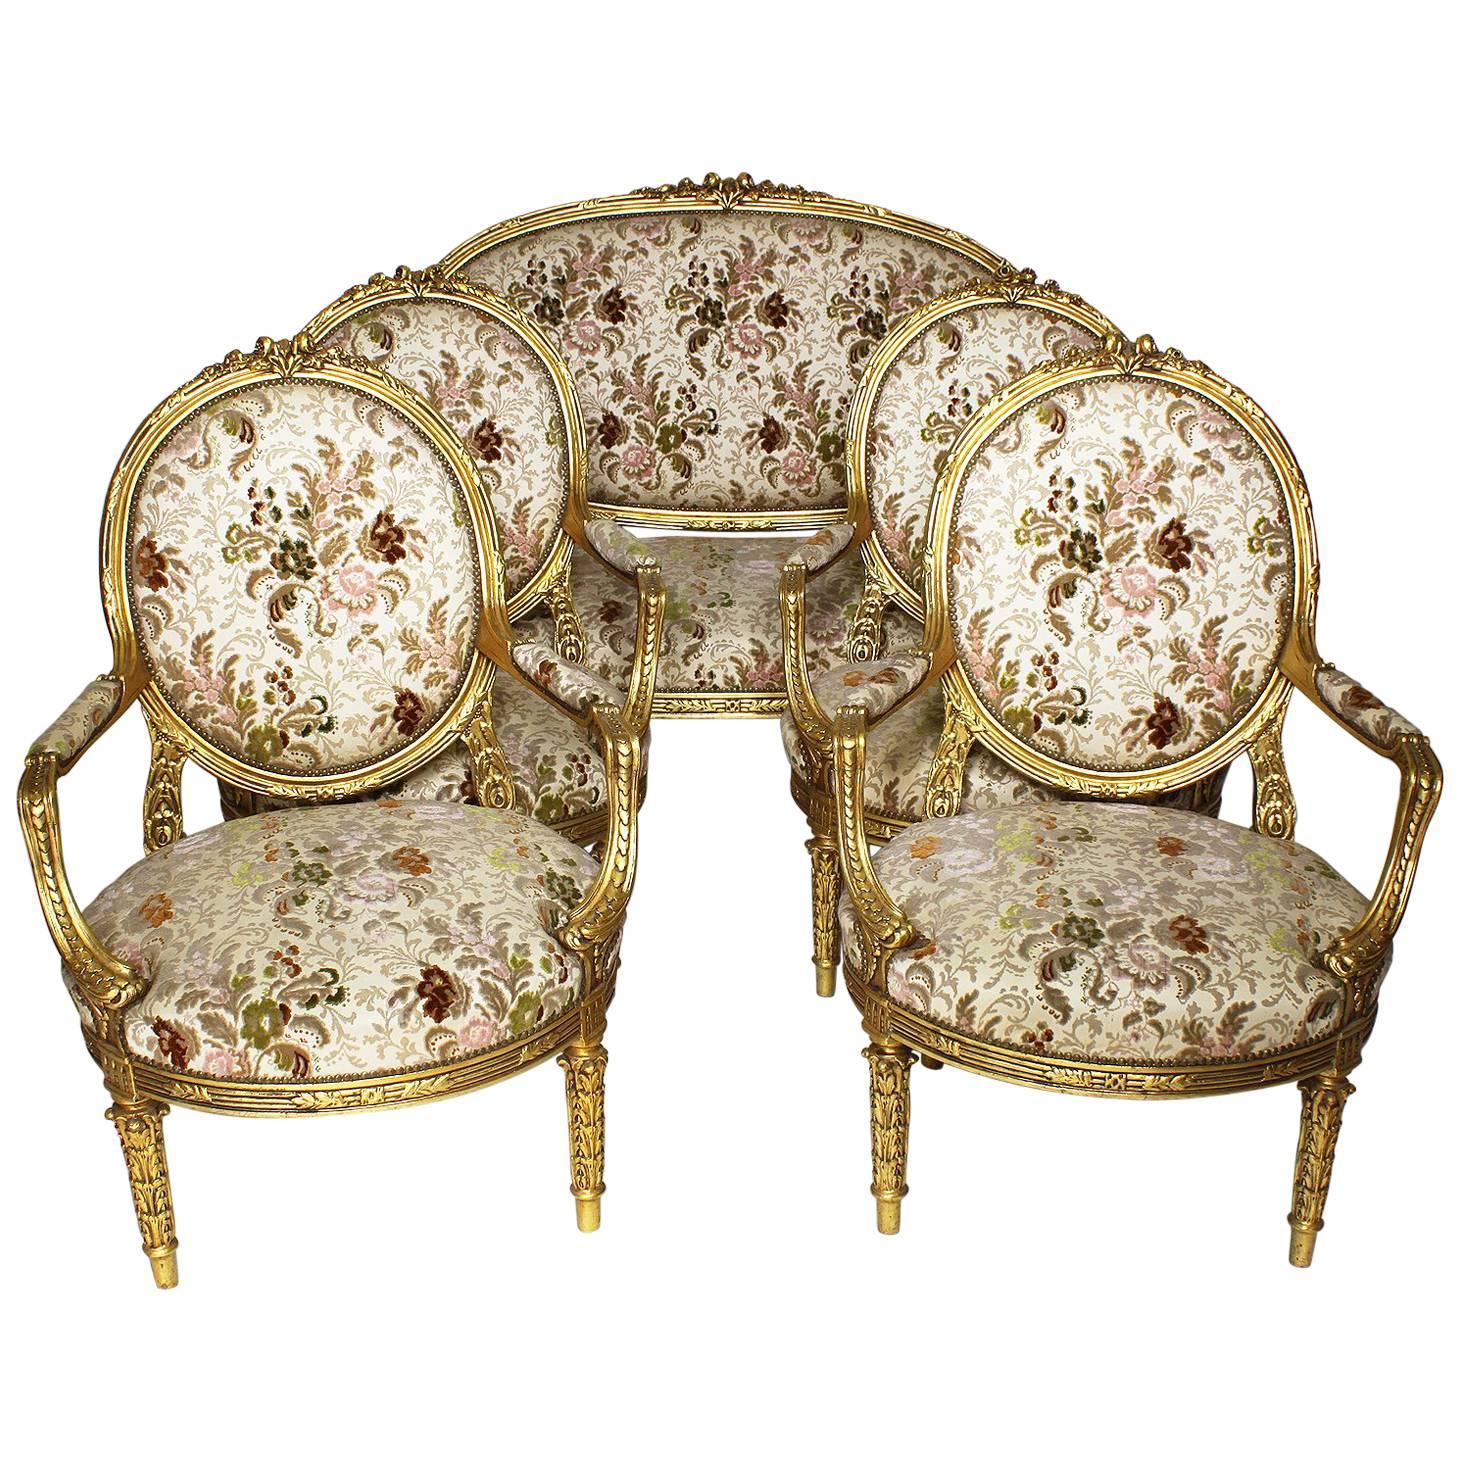 French 19th-20th Century Louis XV Style Giltwood Carved Five-Piece Salon Suite